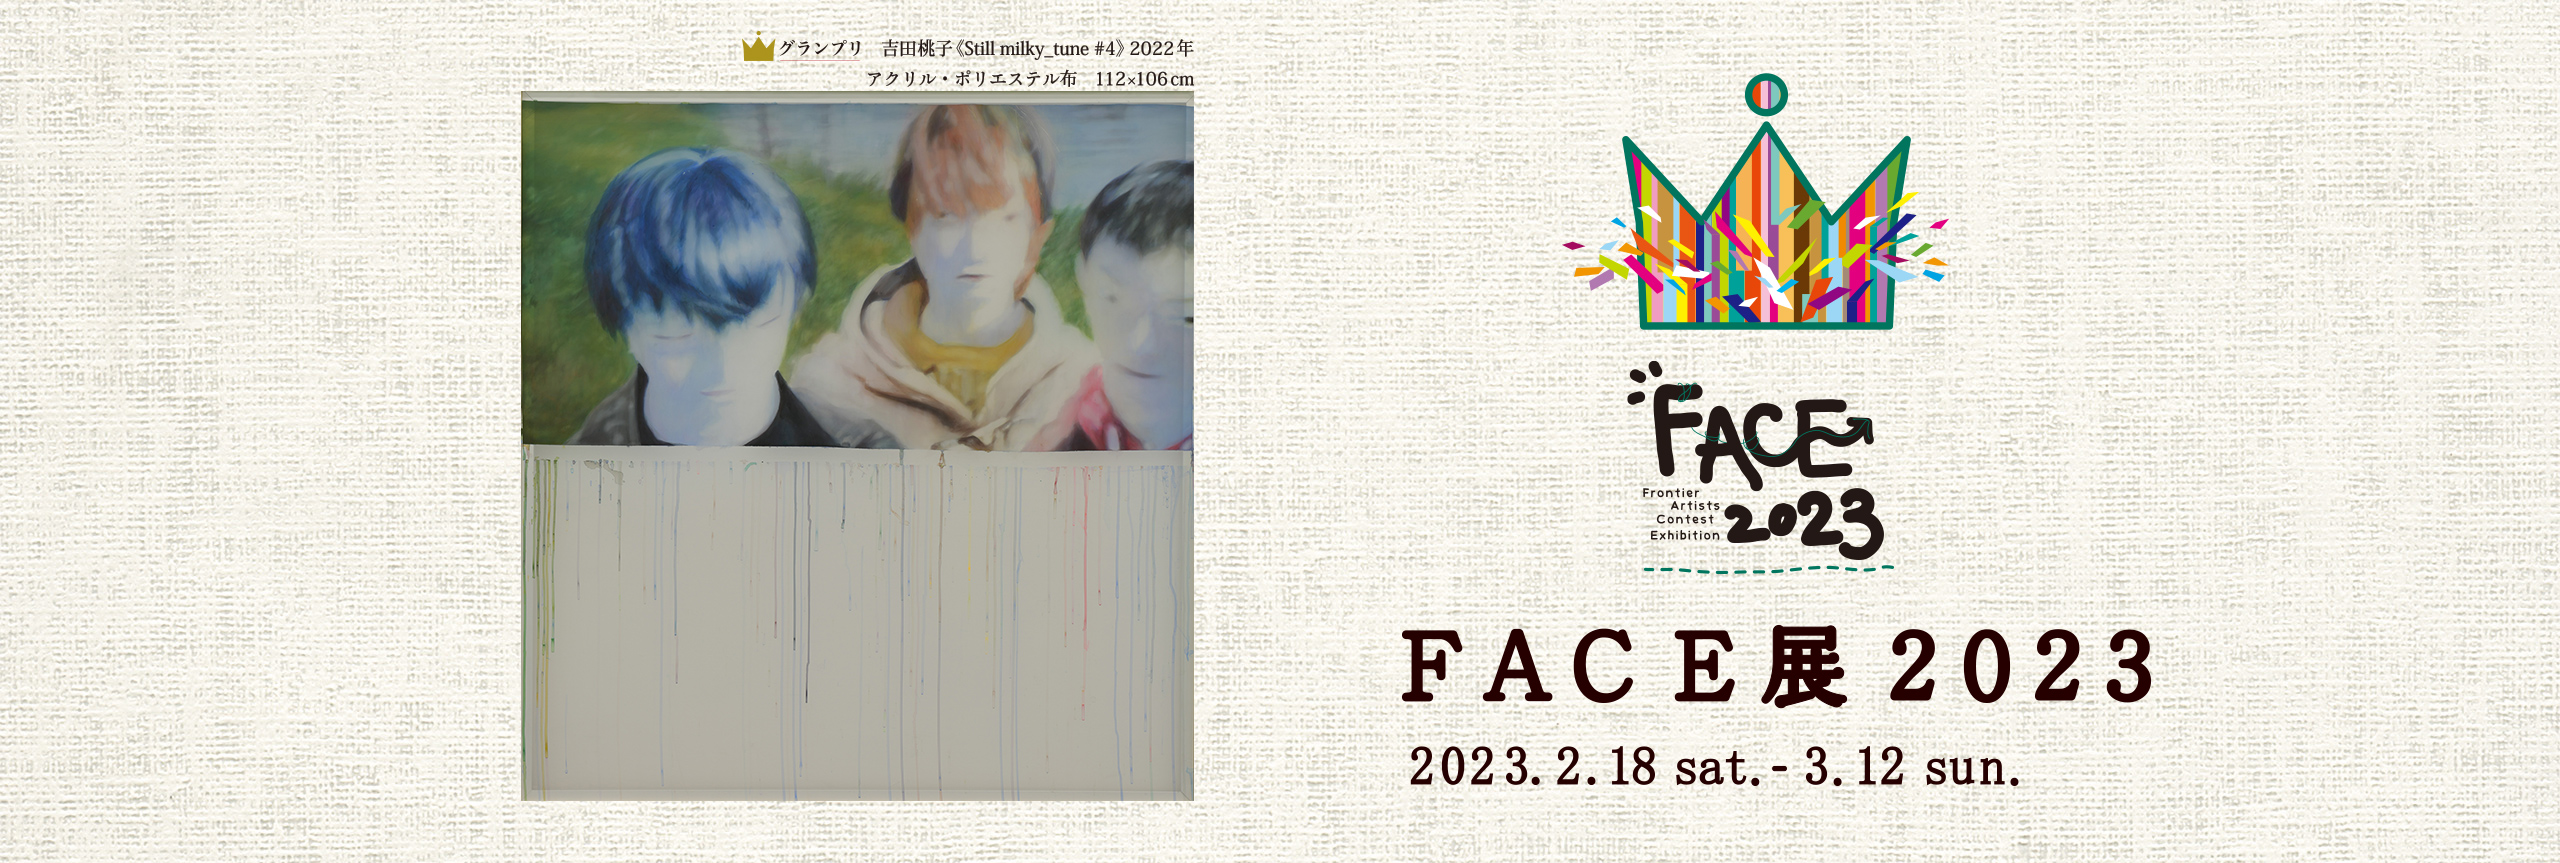 FACE (Frontier Artists Contest Exhibition) 2023